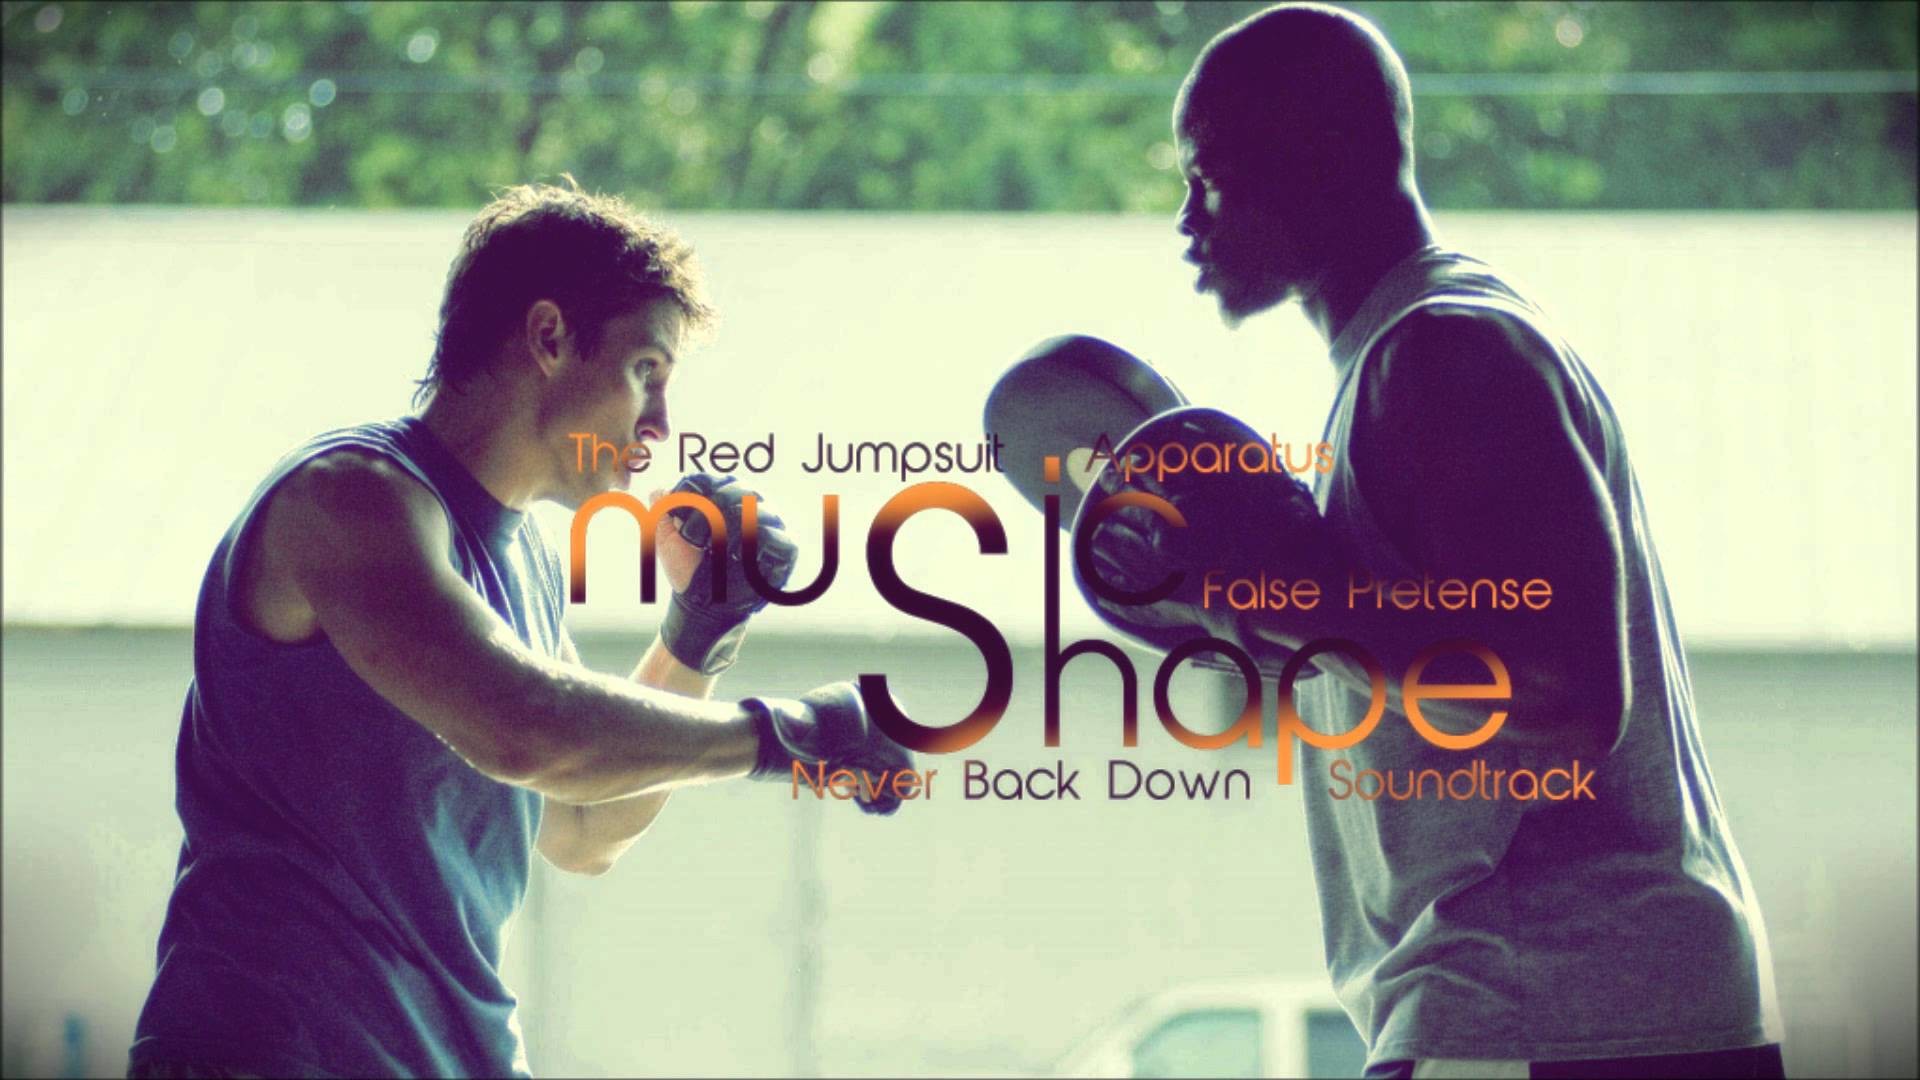 The Red Jumpsuit Apparatus - Never Back Down Training , HD Wallpaper & Backgrounds